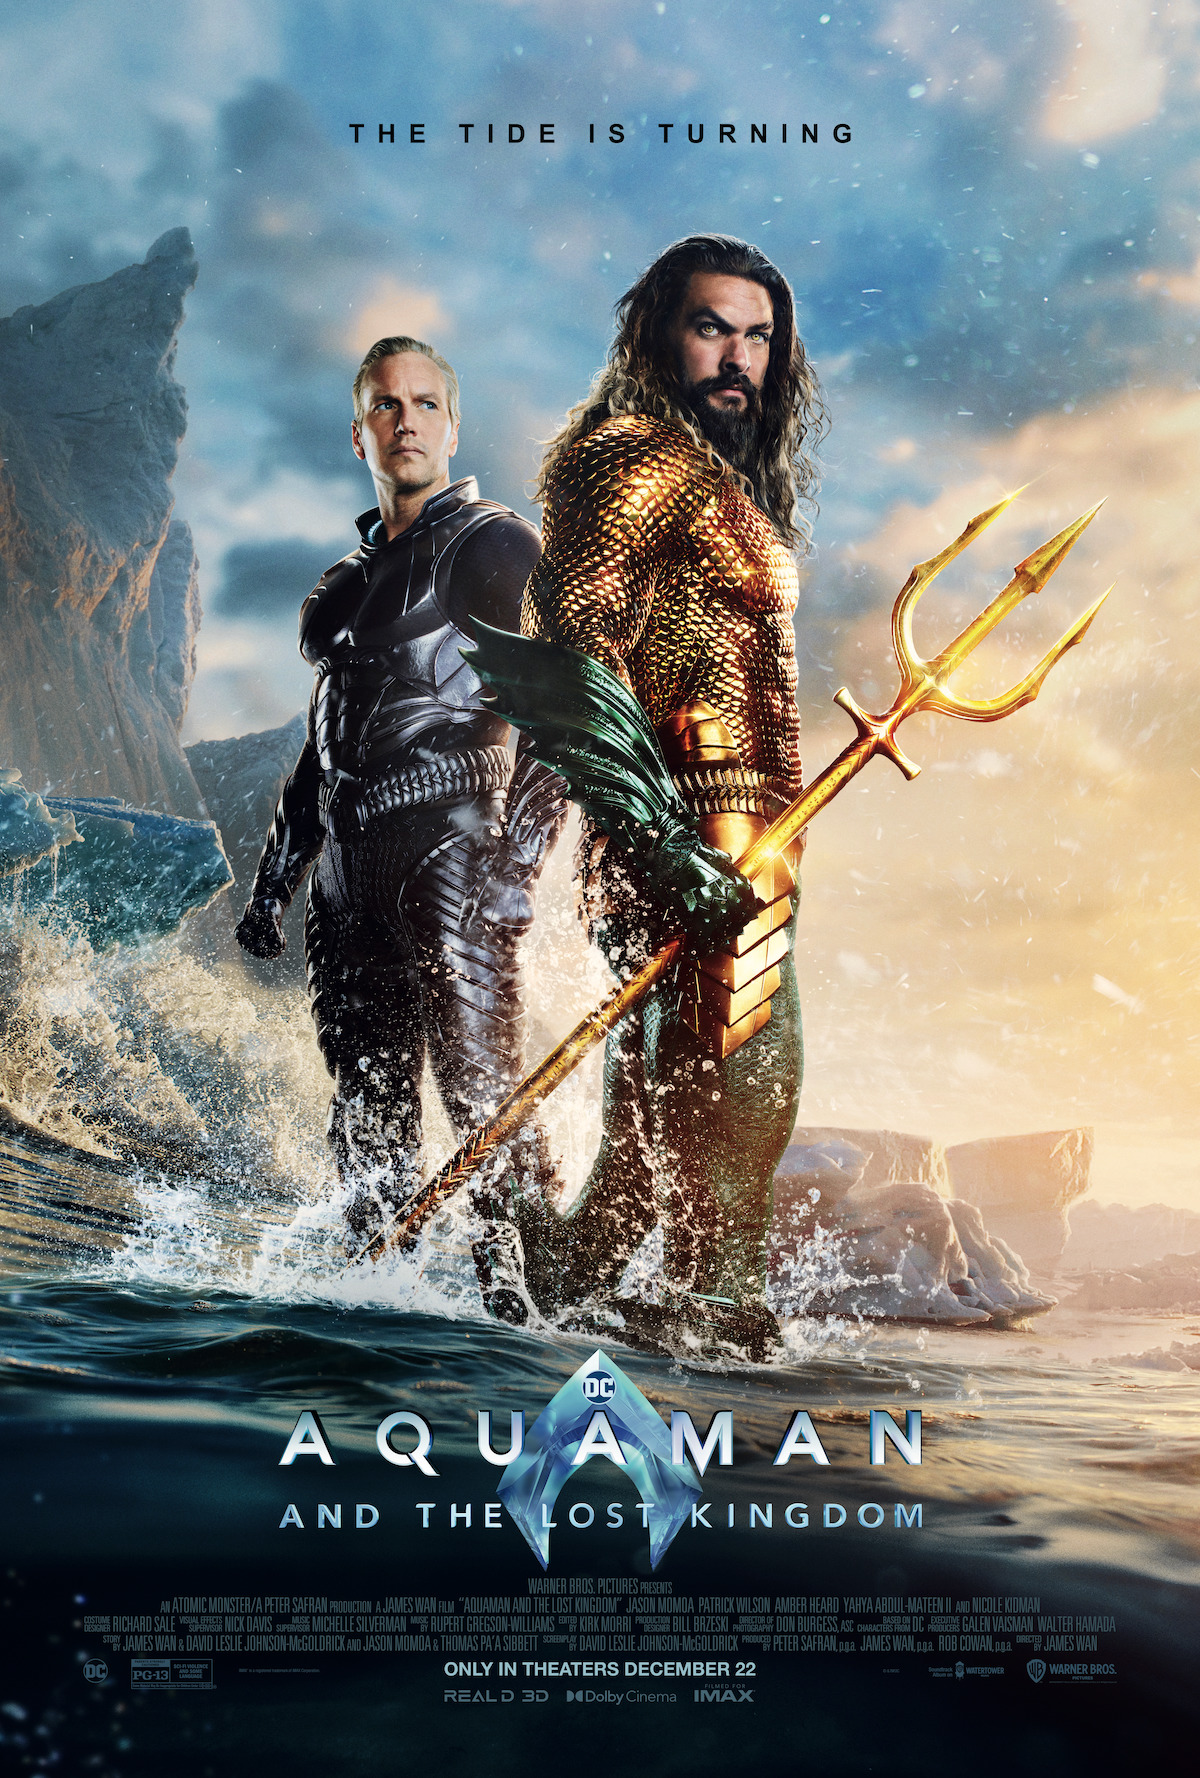 Aquaman and the Lost Kingdom Movie Poster.